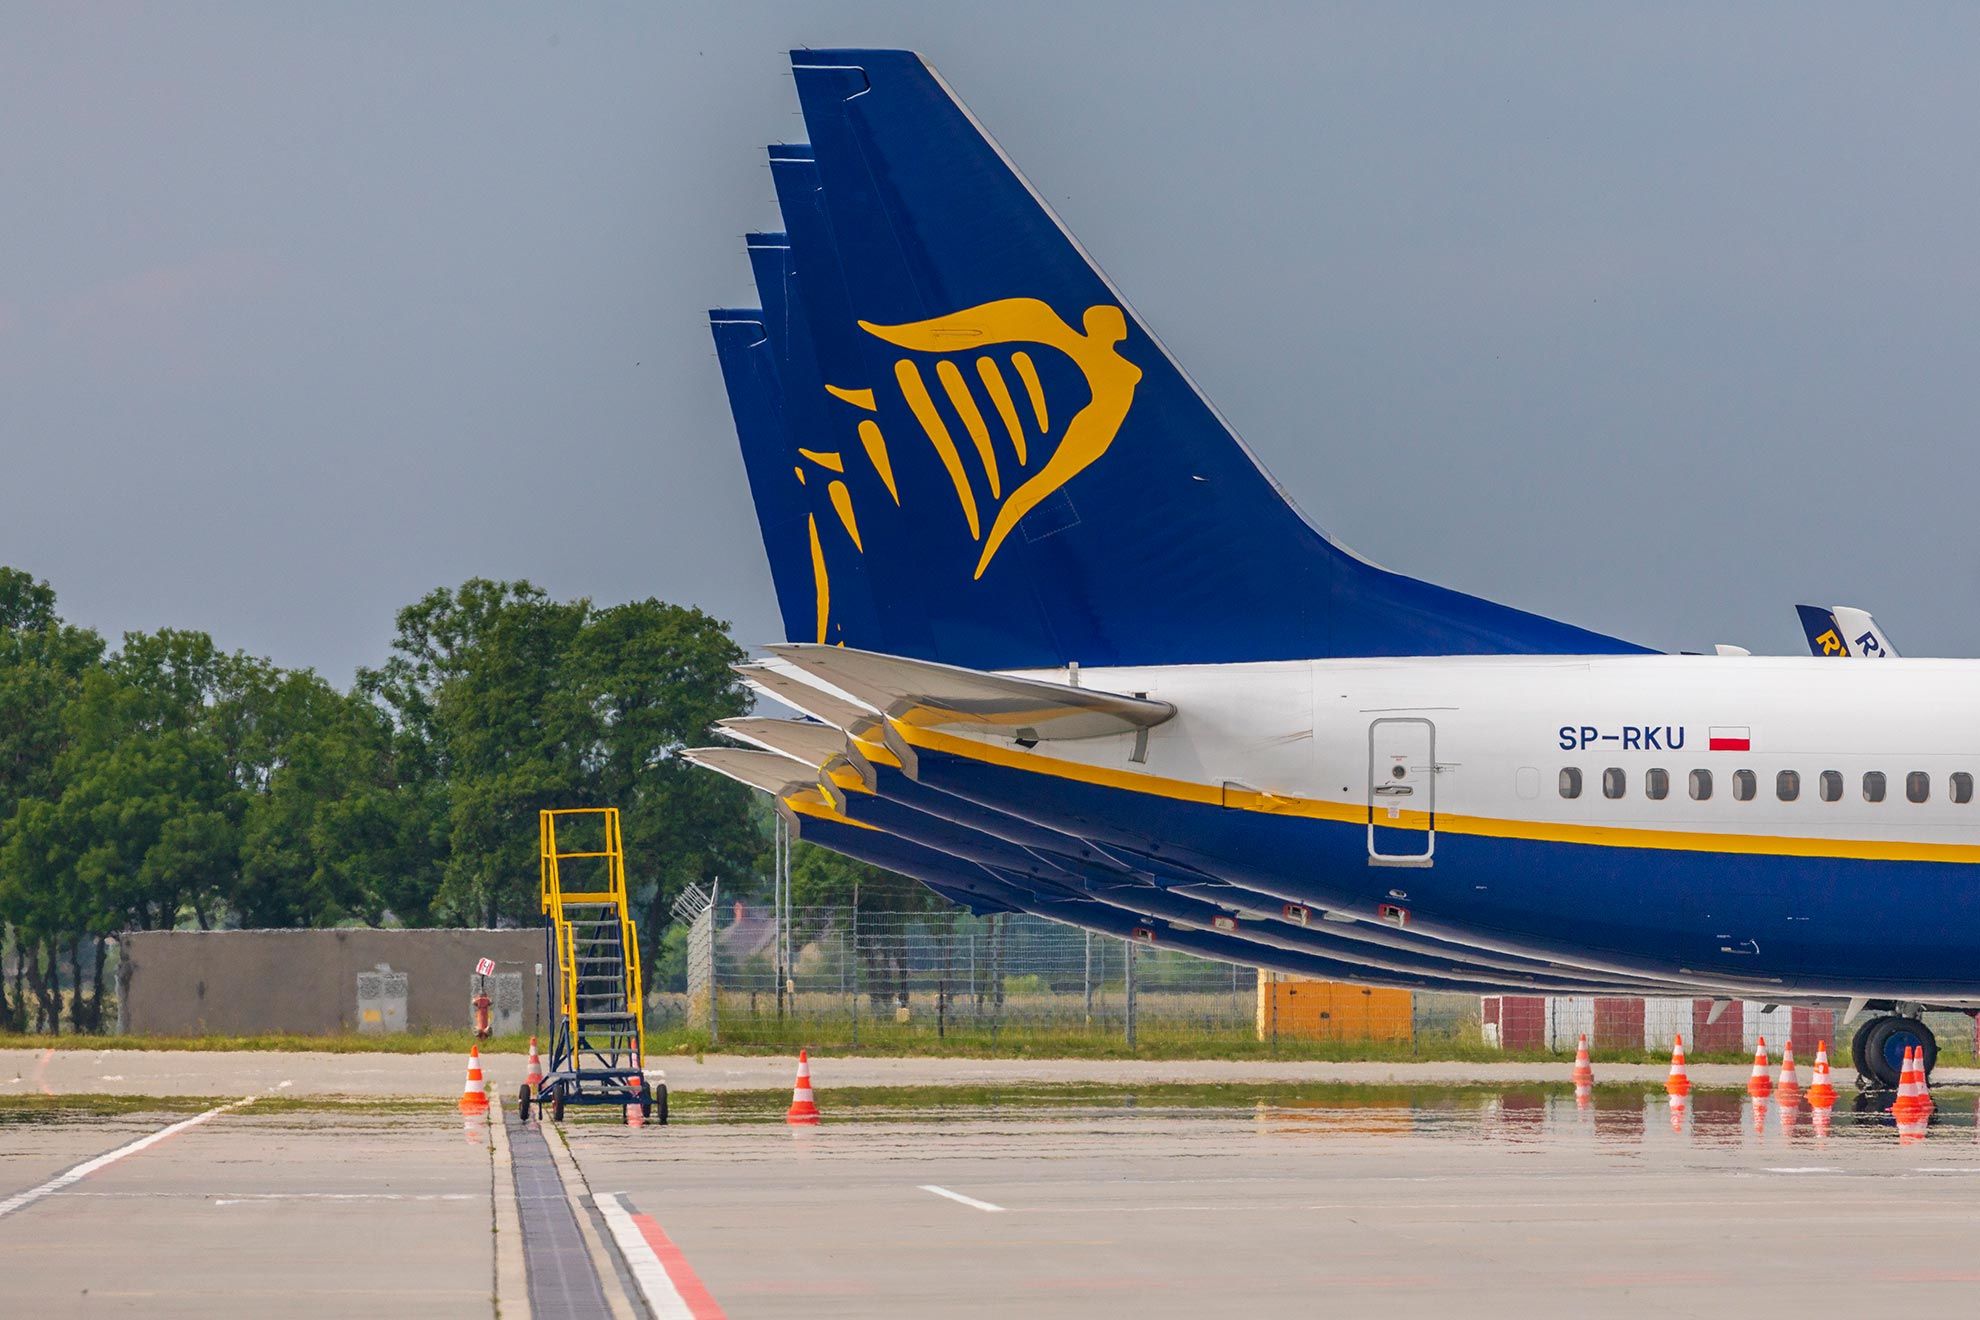 Ryanair Boeing 737 aircraft tails